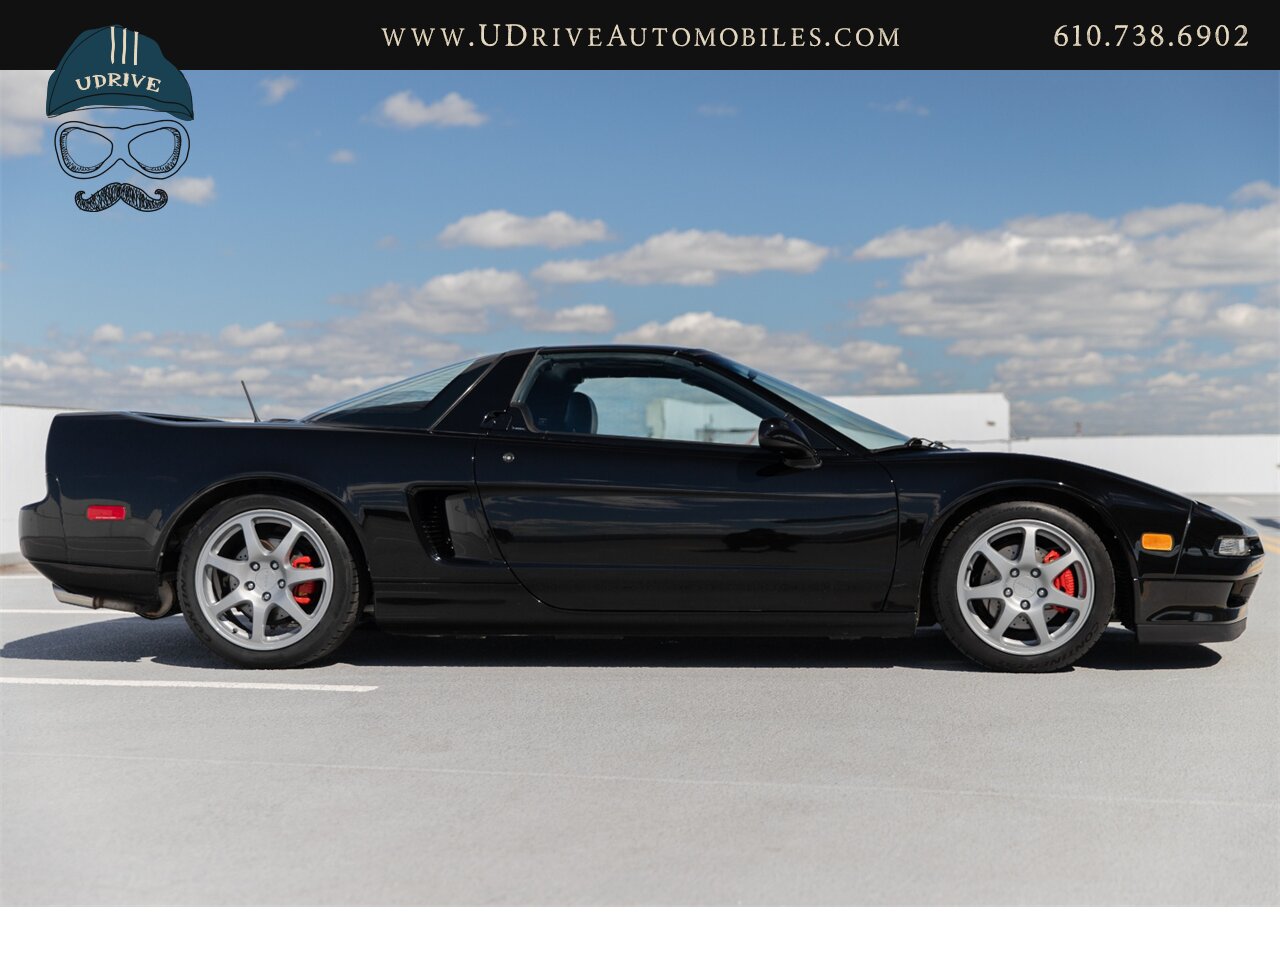 1996 Acura NSX NSX-T  5 Speed Manual Fresh Timing Belt Service - Photo 20 - West Chester, PA 19382